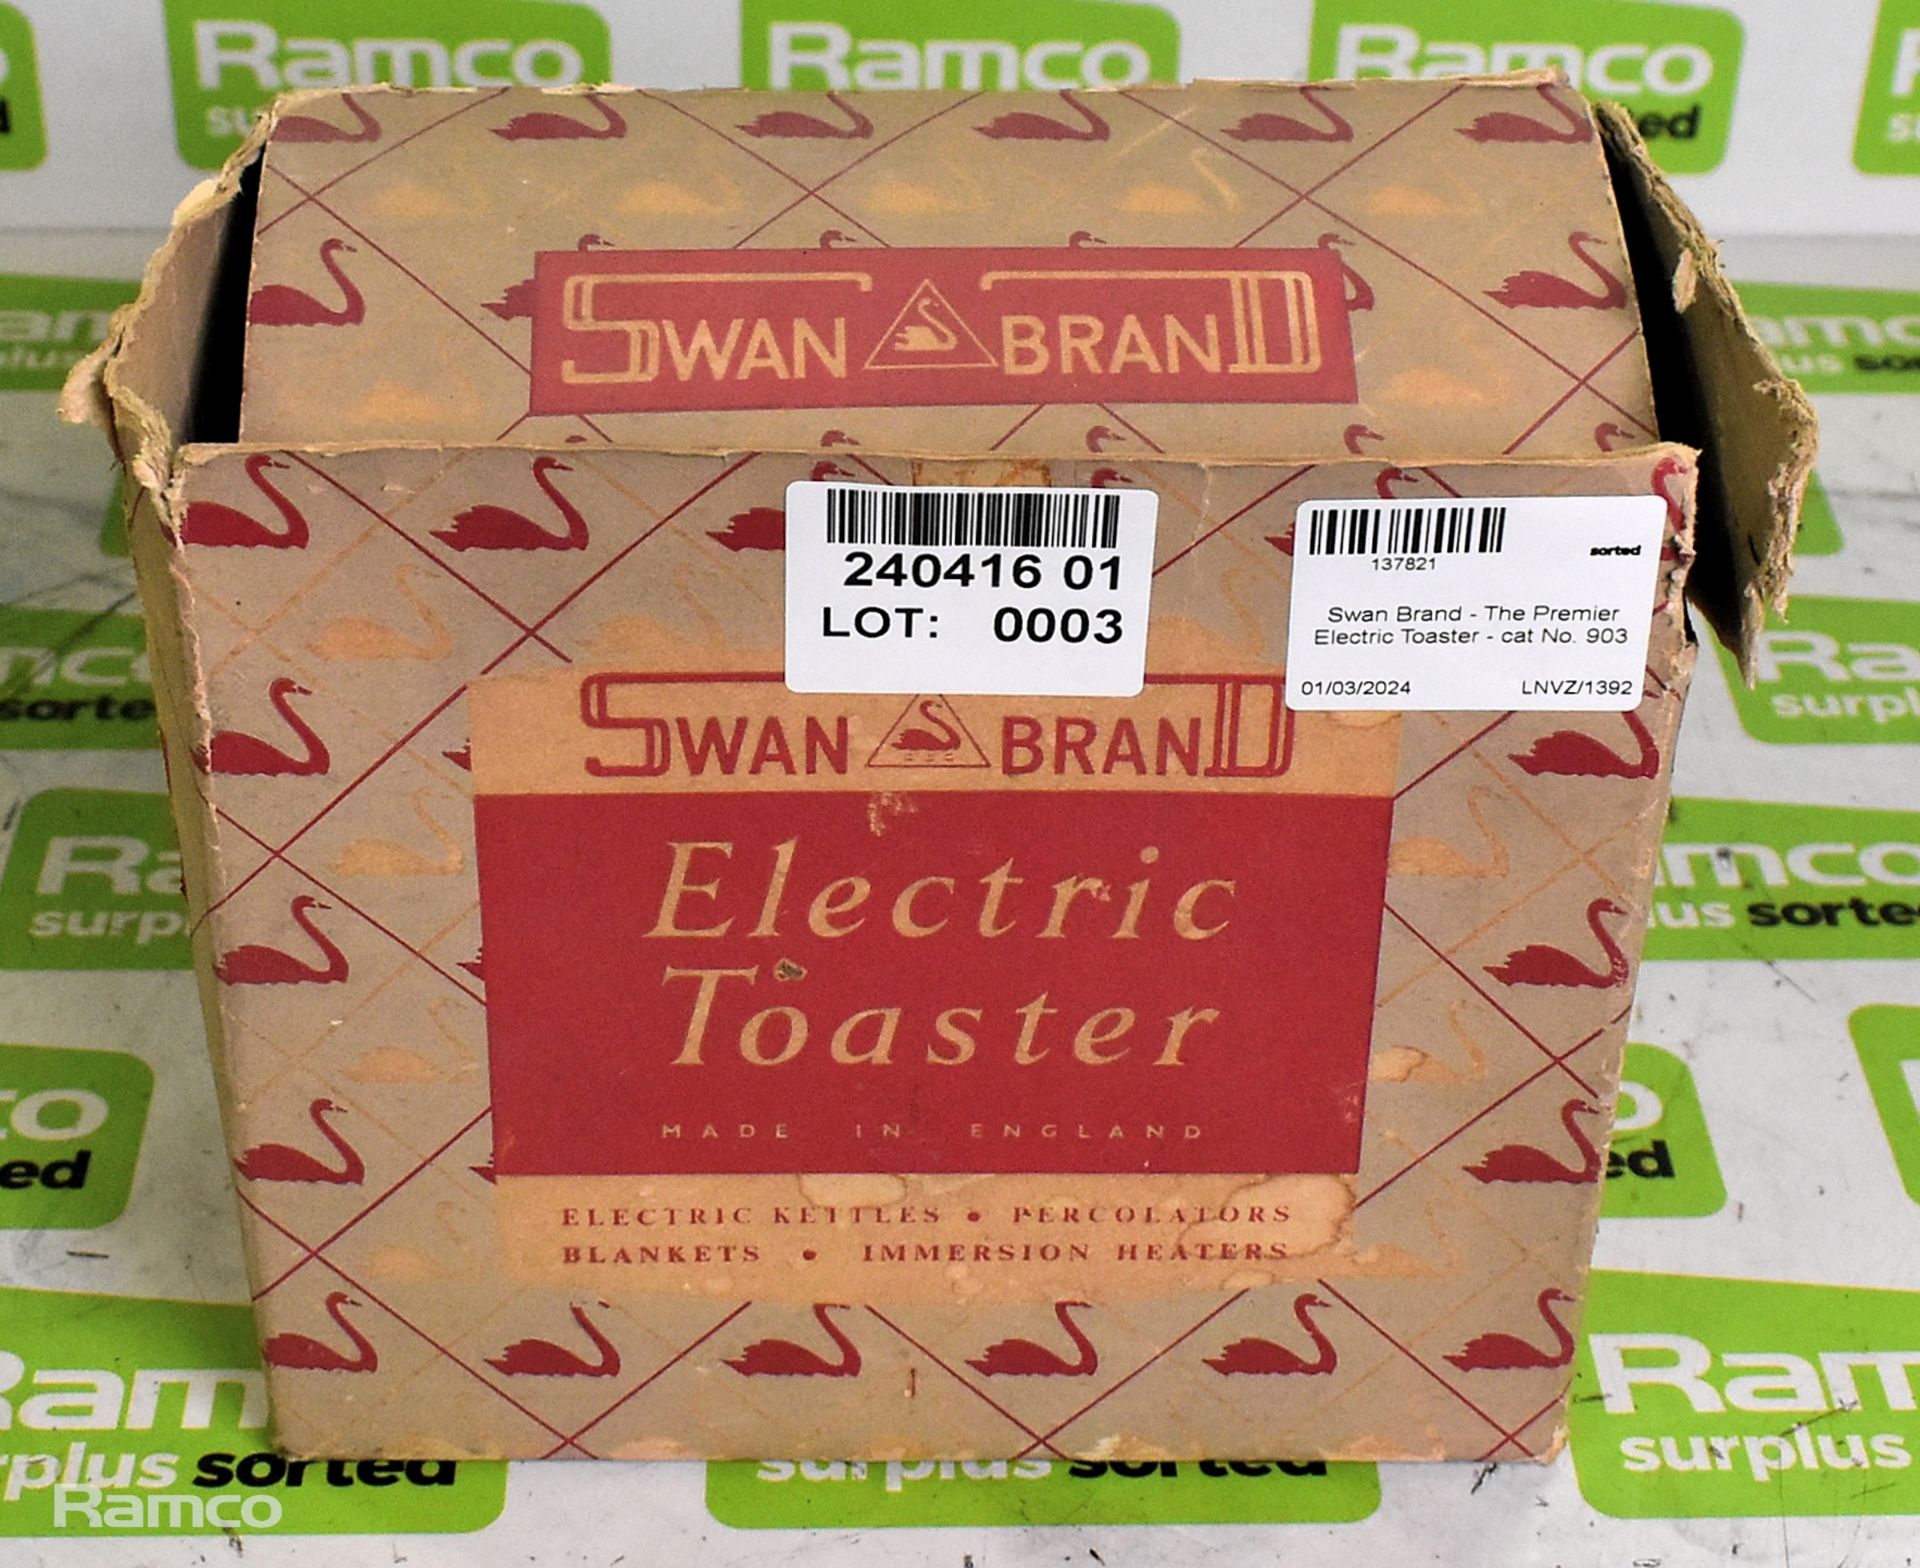 Swan Brand - The Premier Electric Toaster - cat No. 903 - Image 7 of 11